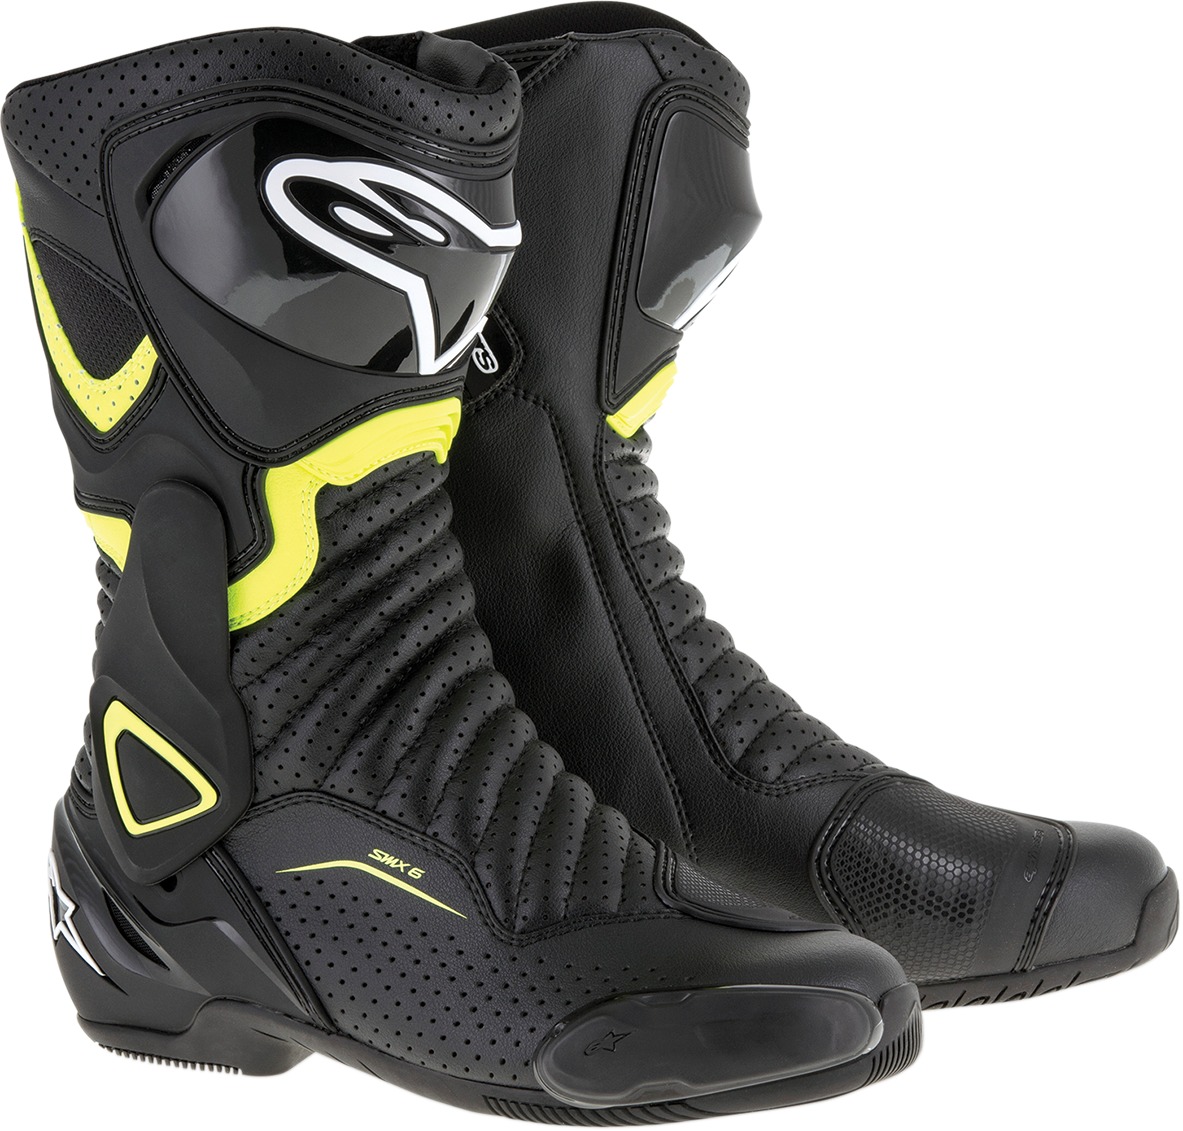 SMX-6v2 Vented Street Riding Boots Black/Yellow US 9 - Click Image to Close